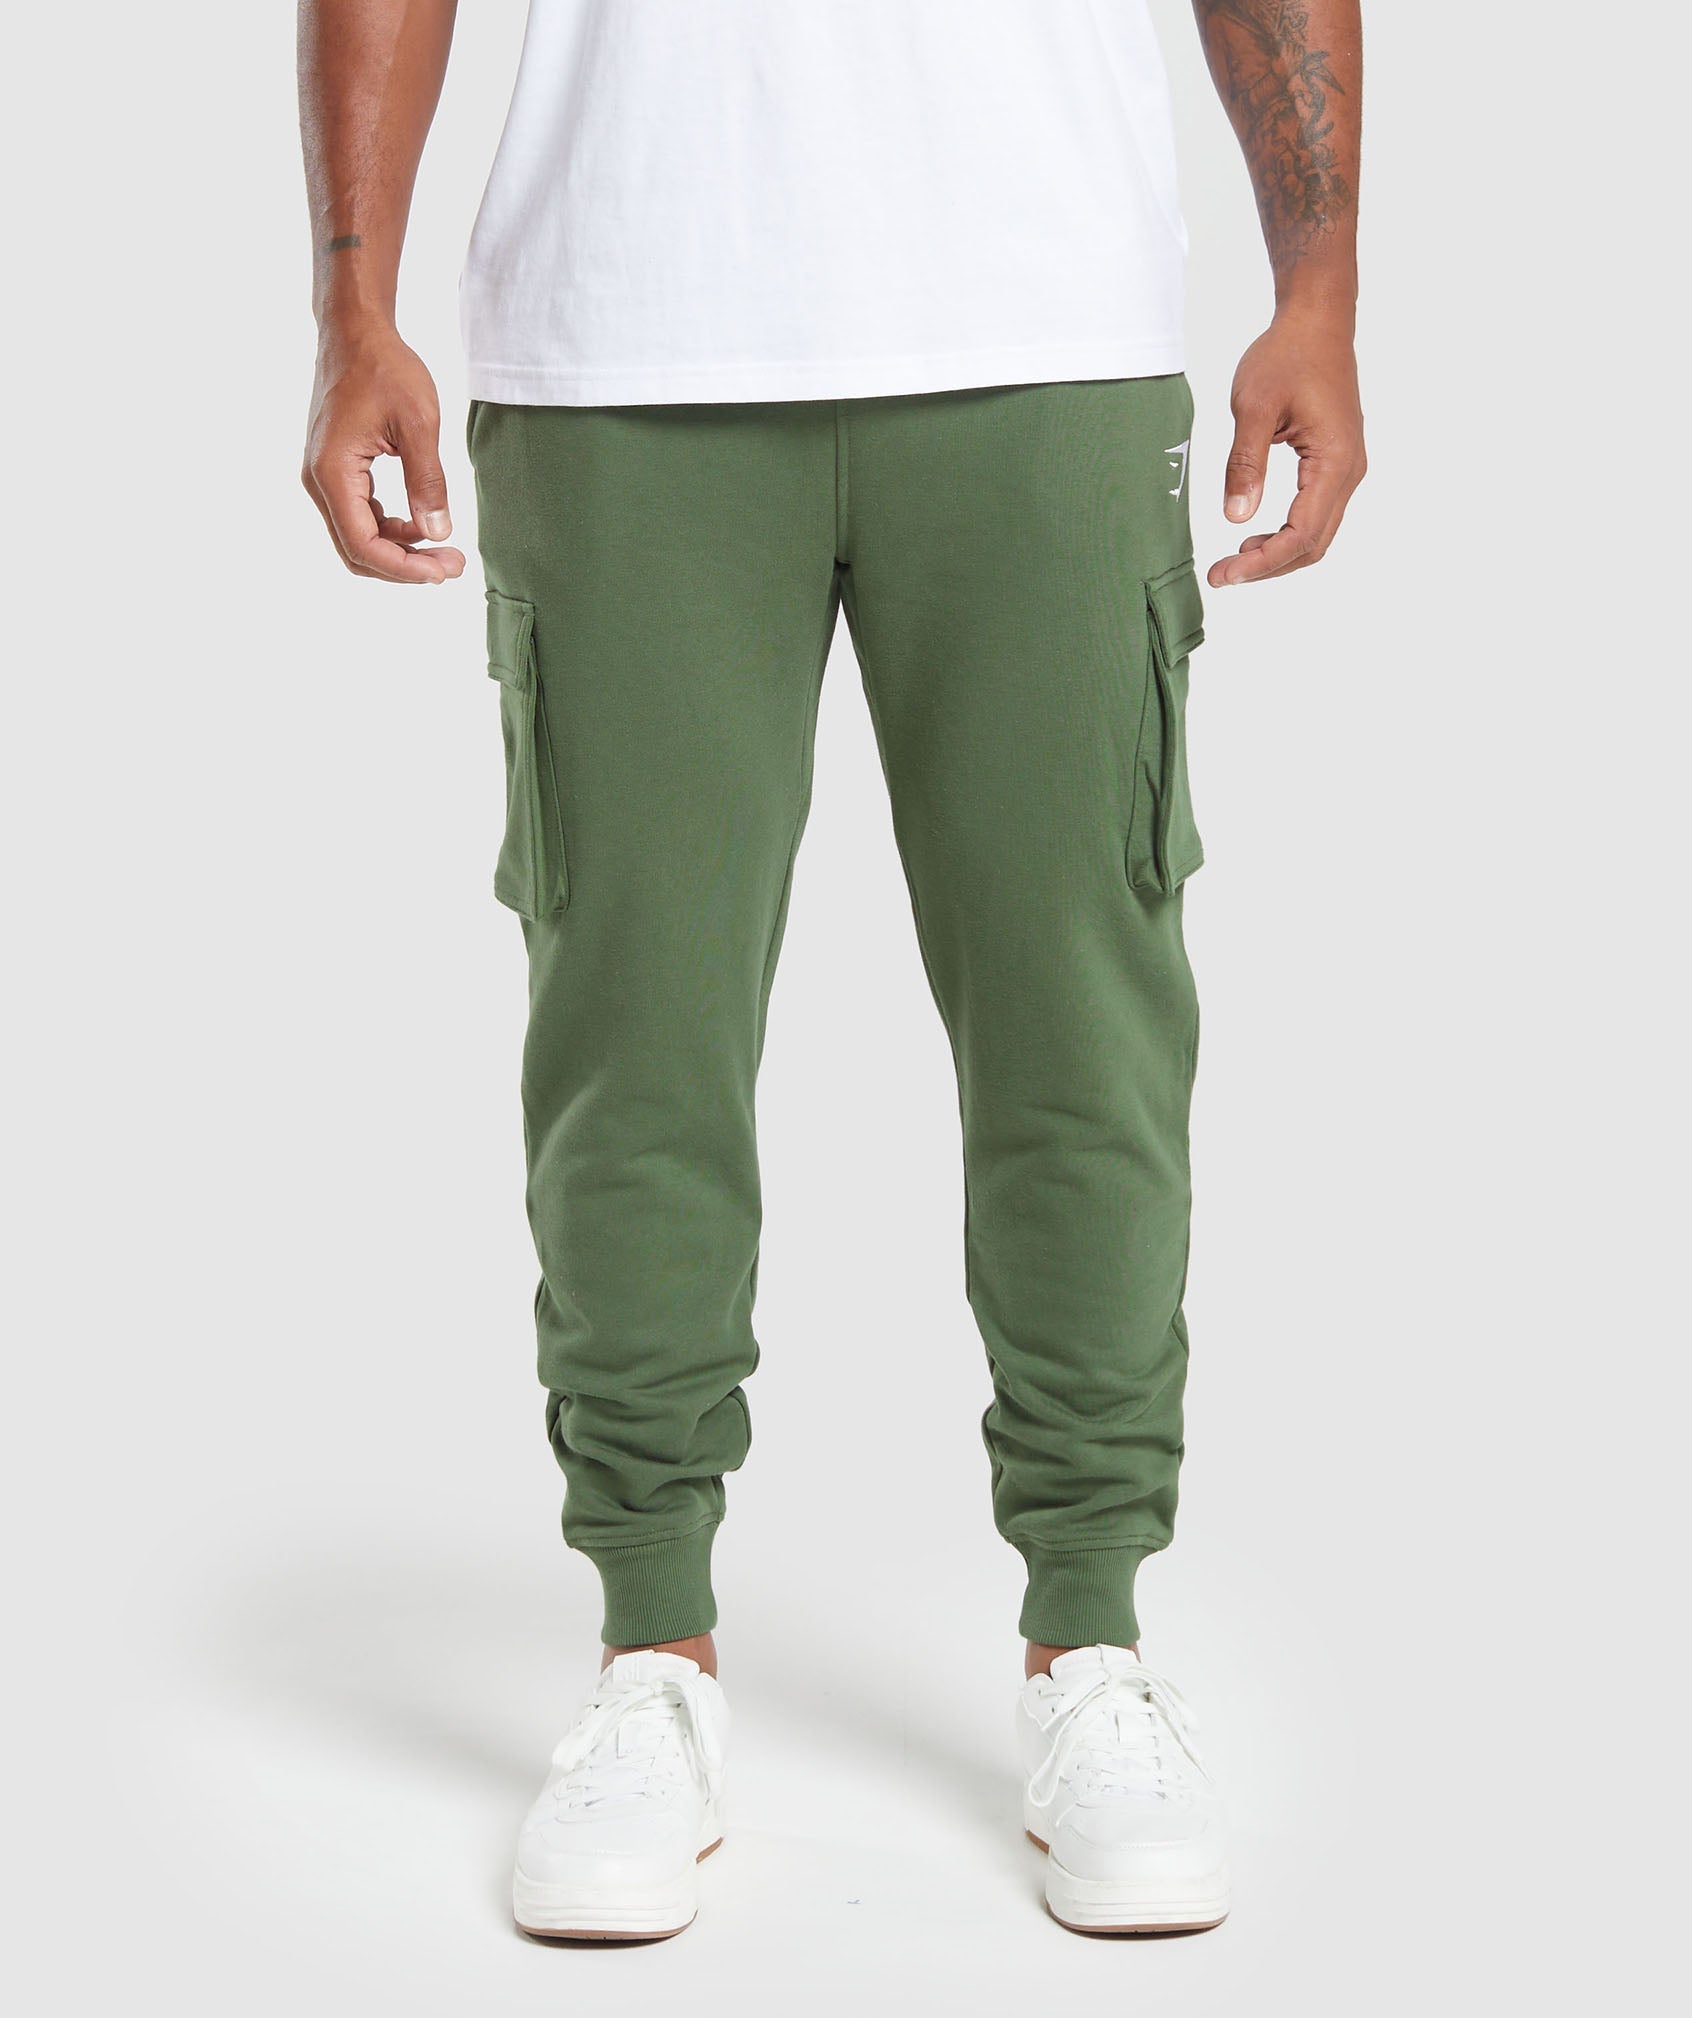 Replying to @jxysaint #greenscreen “Crest Joggers” by @Gymshark #gymsh